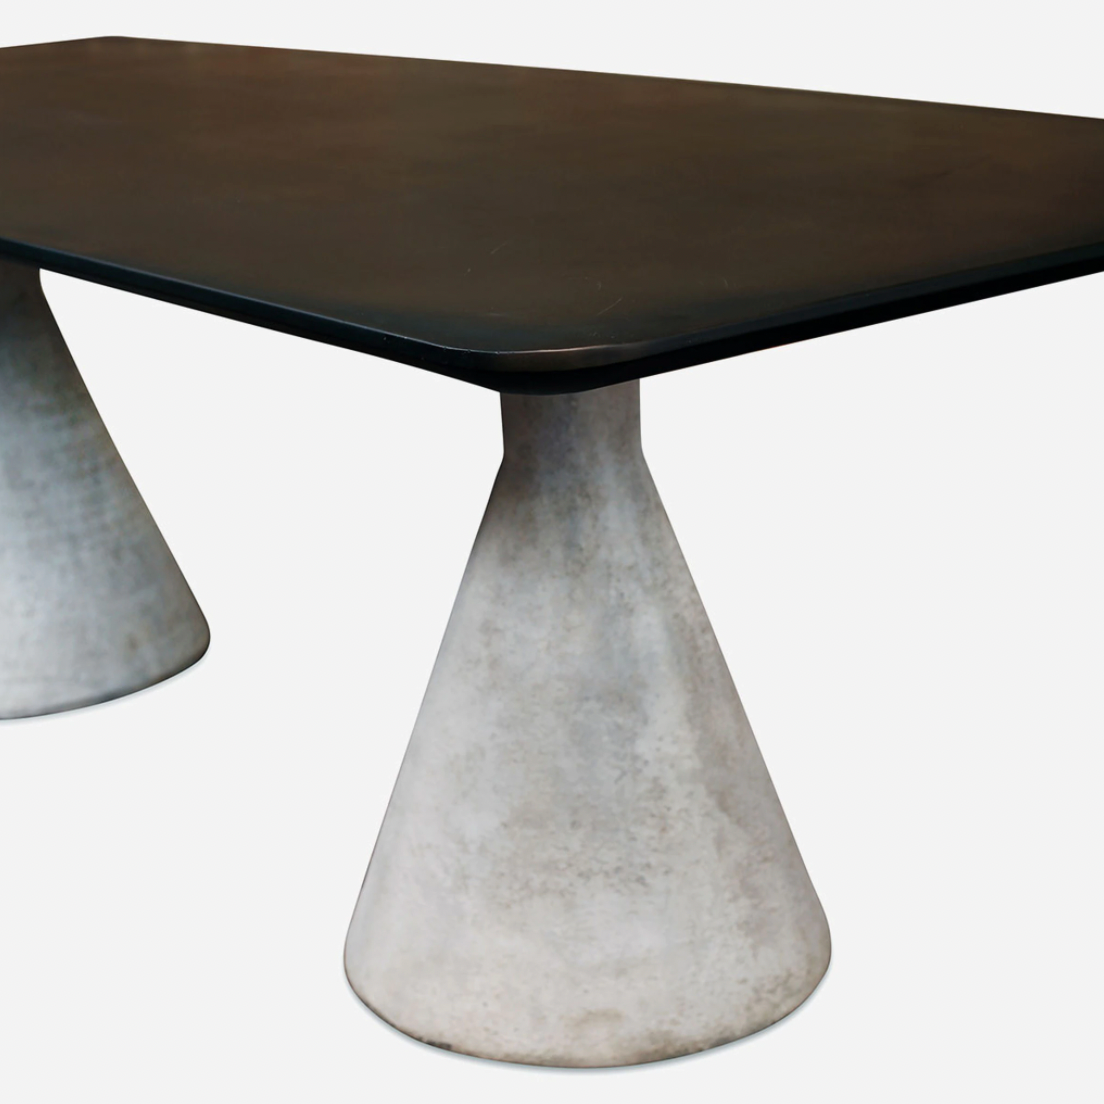 This Conical Dining Table is made from stainless steel and inspired by Willy Guhl Hourglass Planters. The unique base is made from aluminum with a concrete finish - a statement piece for any dining room or kitchen!   Size: 40"d x  94"w x 30" h Materials: Stainless Steel